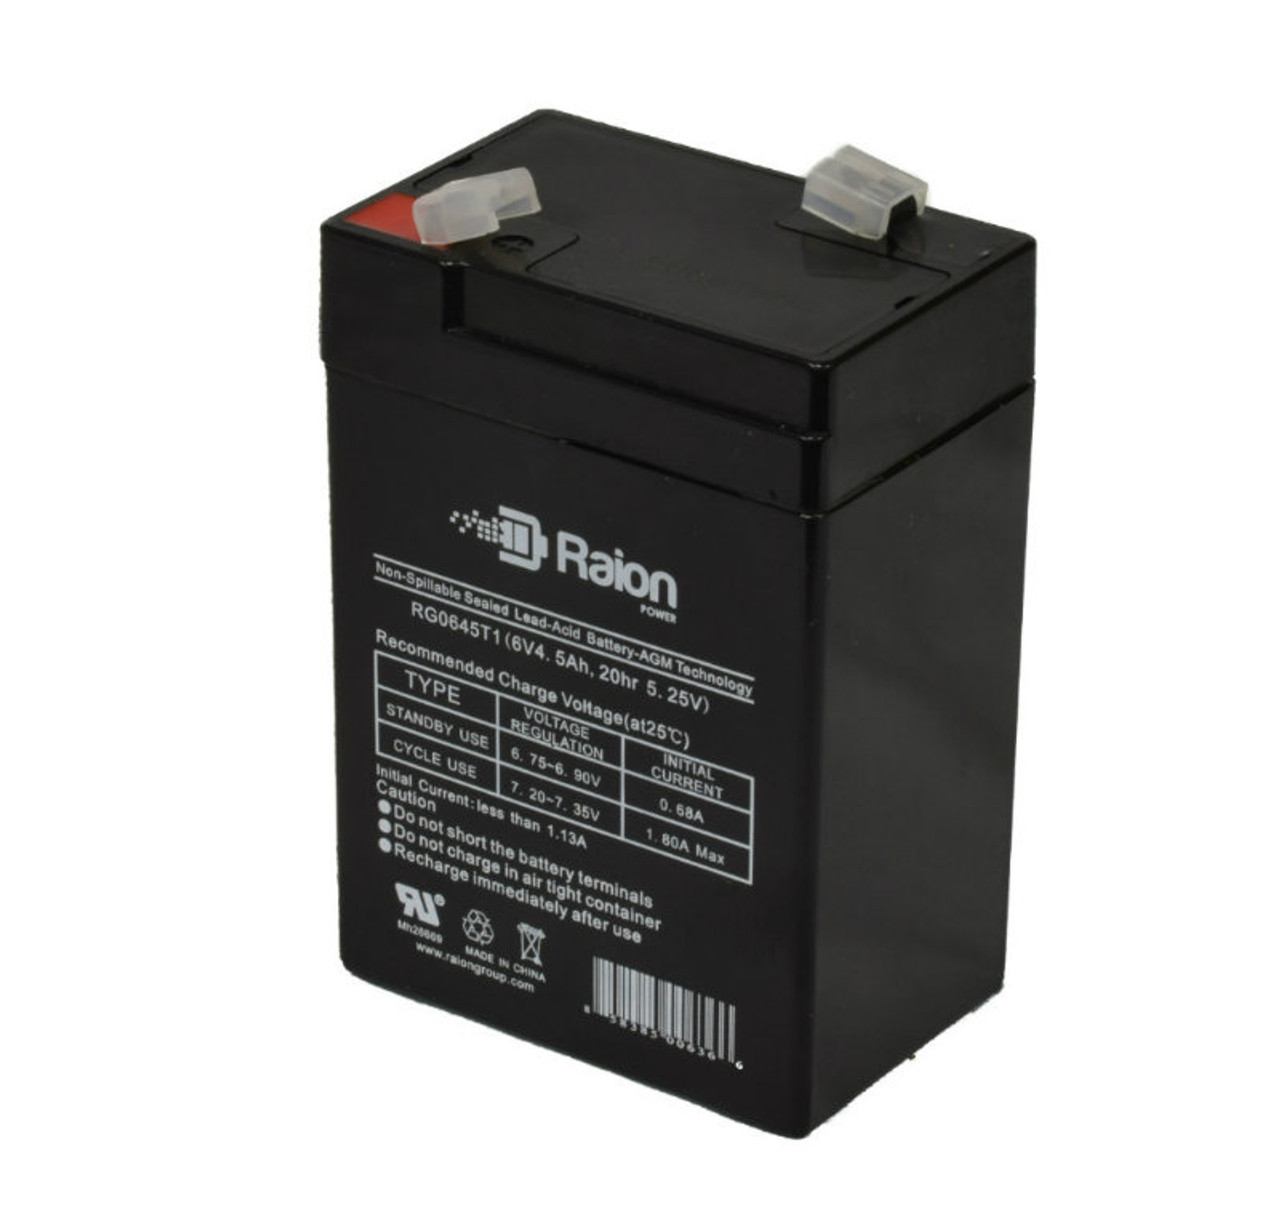 Raion Power RG0645T1 6V 4.5Ah Replacement Battery Cartridge for KAGE MF6V4Ah